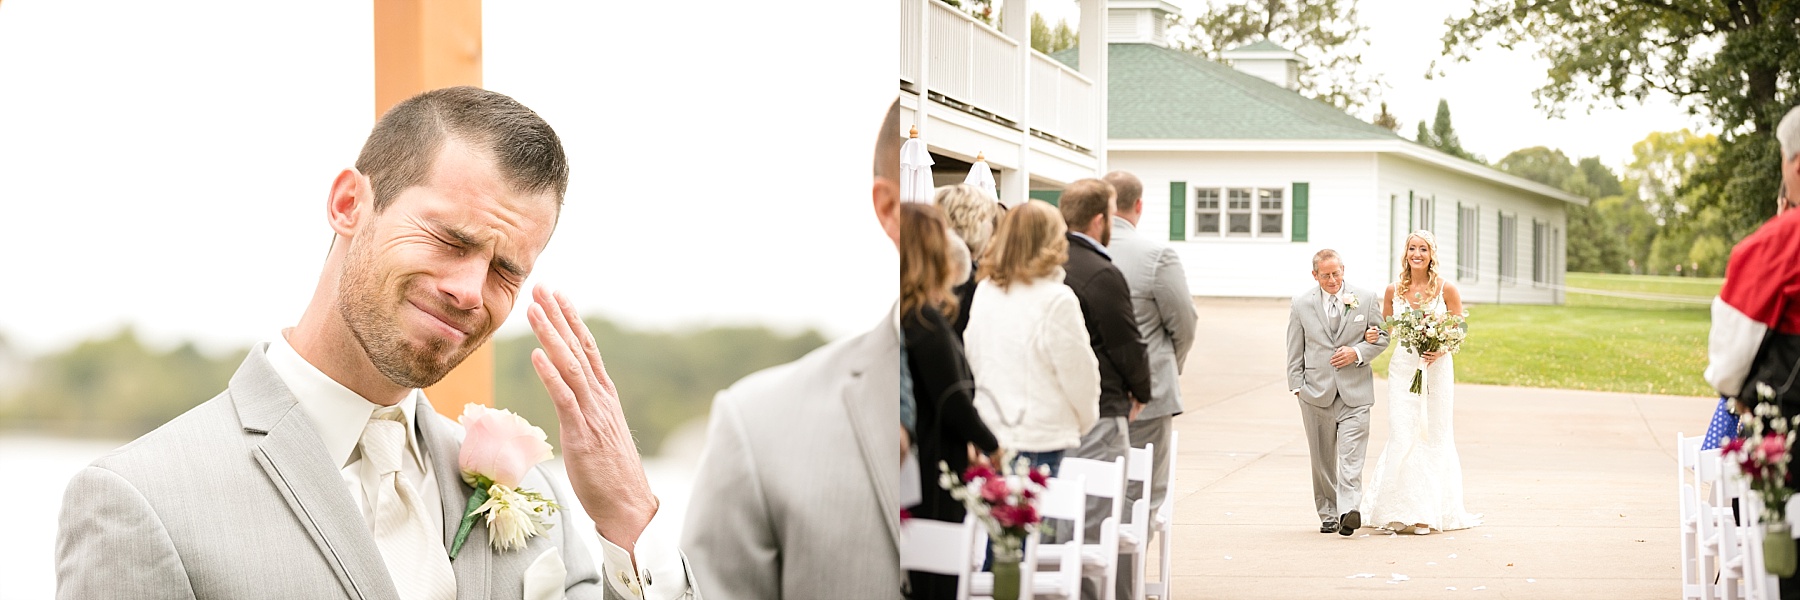 groom crying as bride is walking down the aisle at Lake Wissota Golf & Events